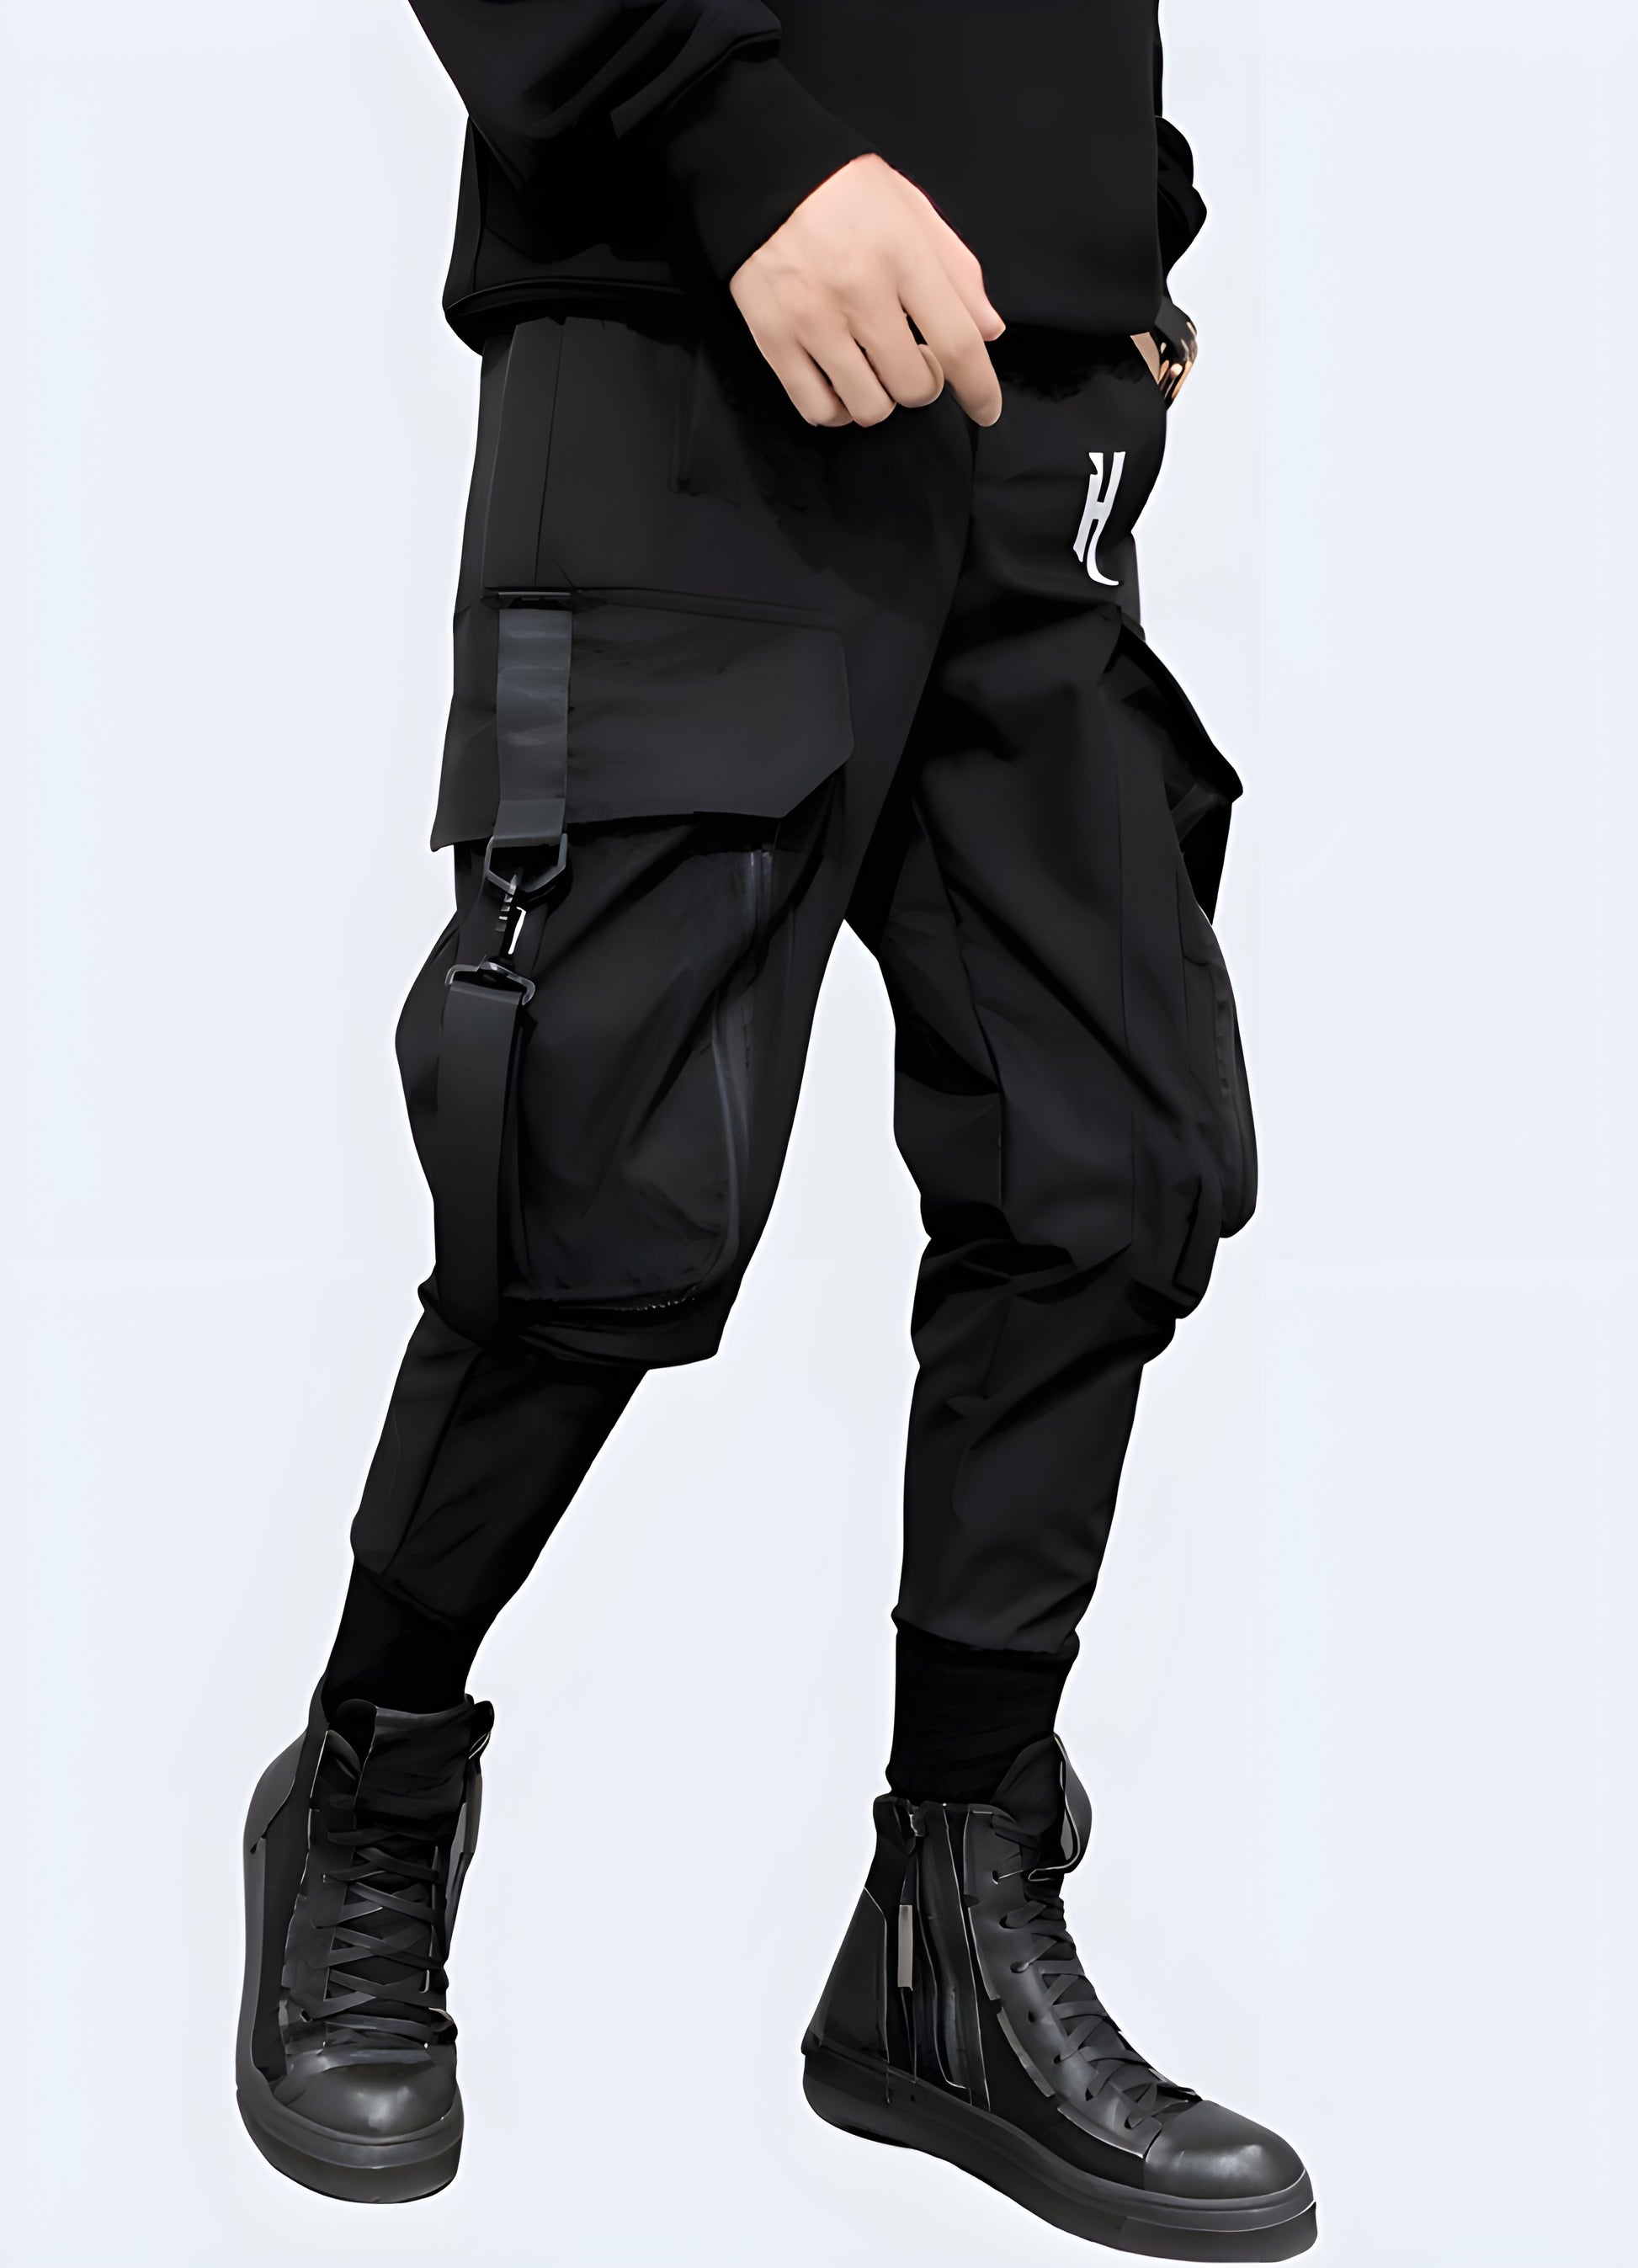 Classic dark cargo pants, crafted from durable fabric for long-lasting wear.